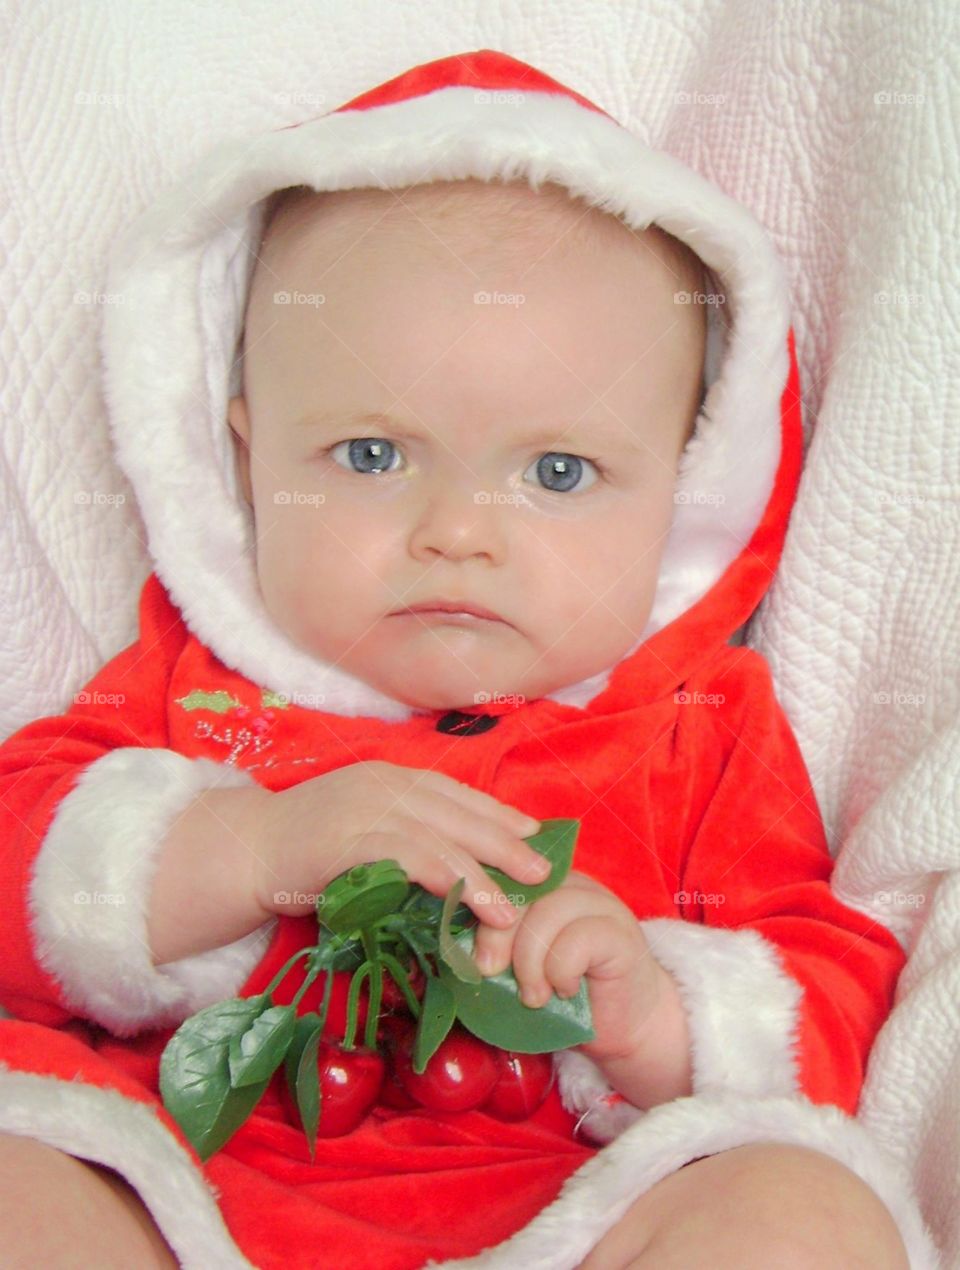 Baby Scrooge . My daughter just didn't want to smile! This picture makes me laugh "Tis the Season to be JOLLY" 